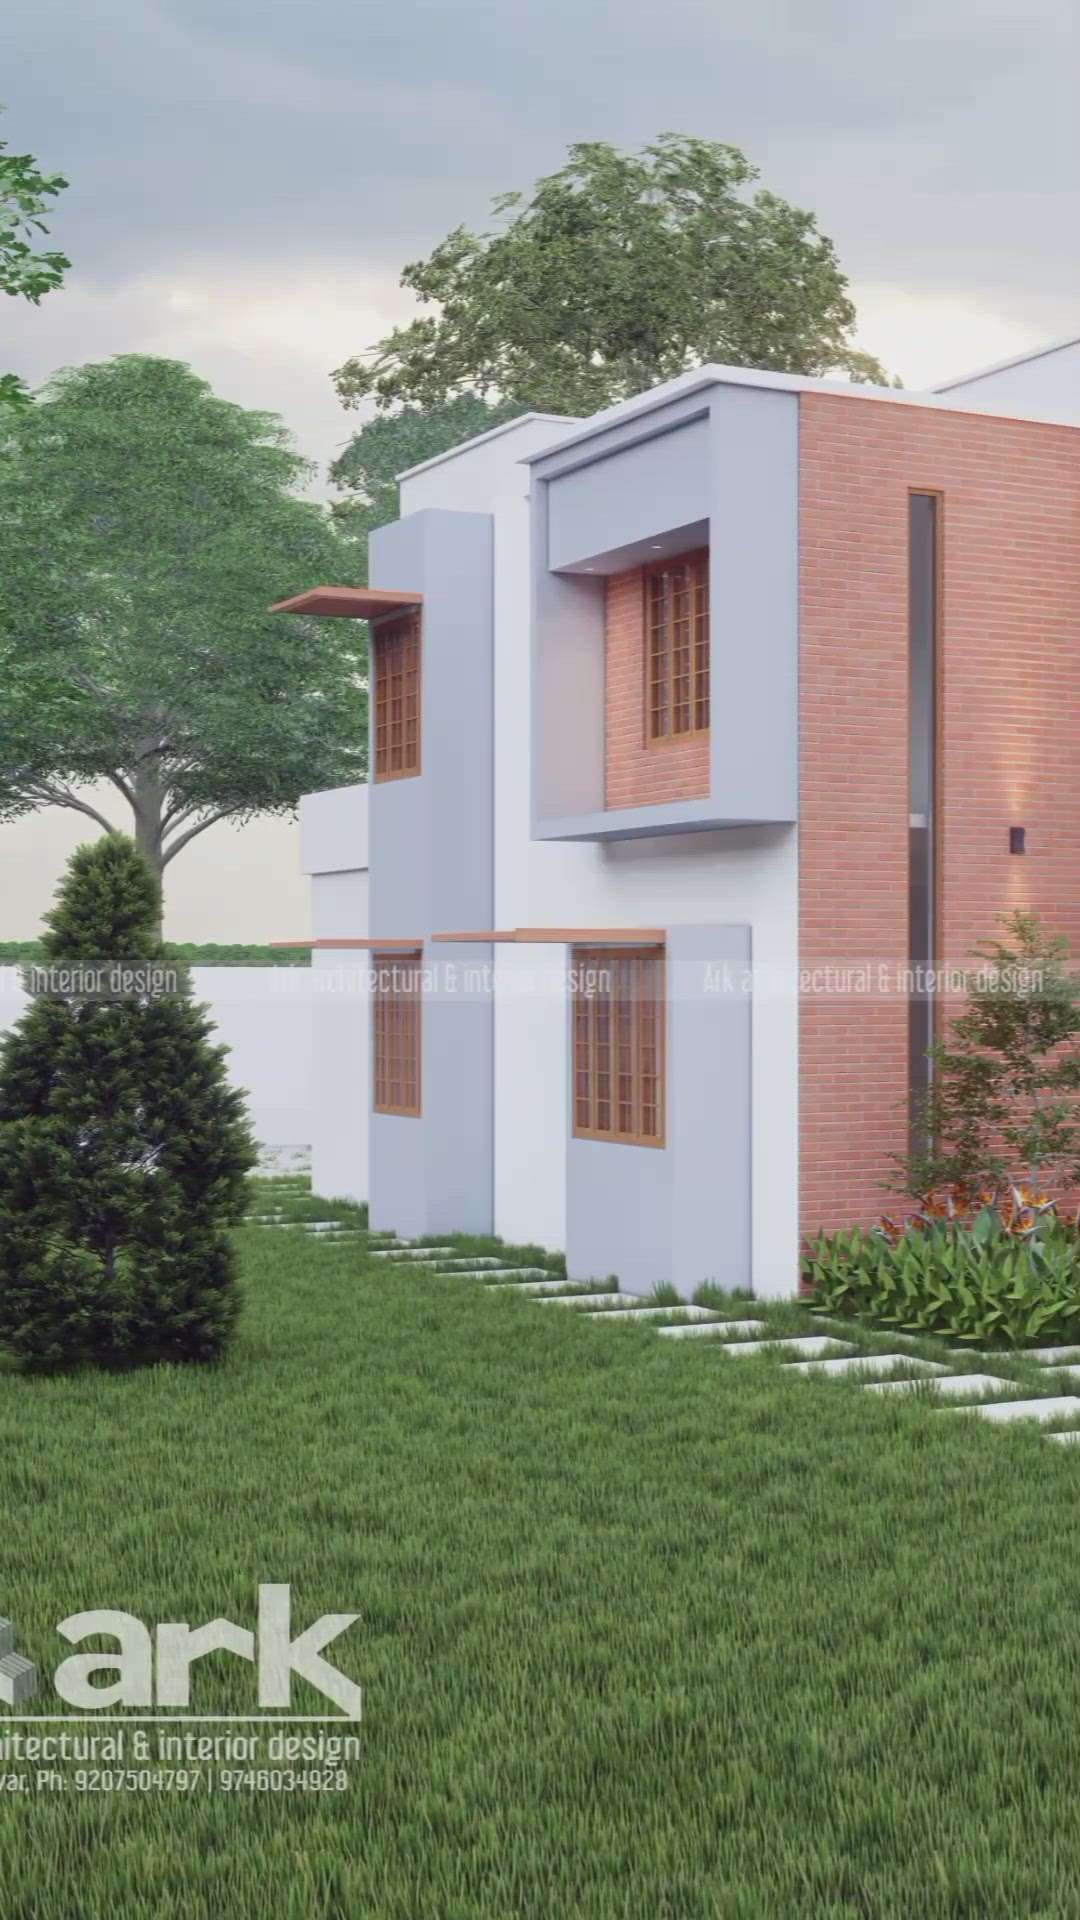 The colours and design of a home should be a reflection of the people who live inside. 🏡 #exteriordesigns  #modernhome  #KeralaStyleHouse  #LandscapeIdeas  #architecturedesigns  #Architect  #CivilEngineer